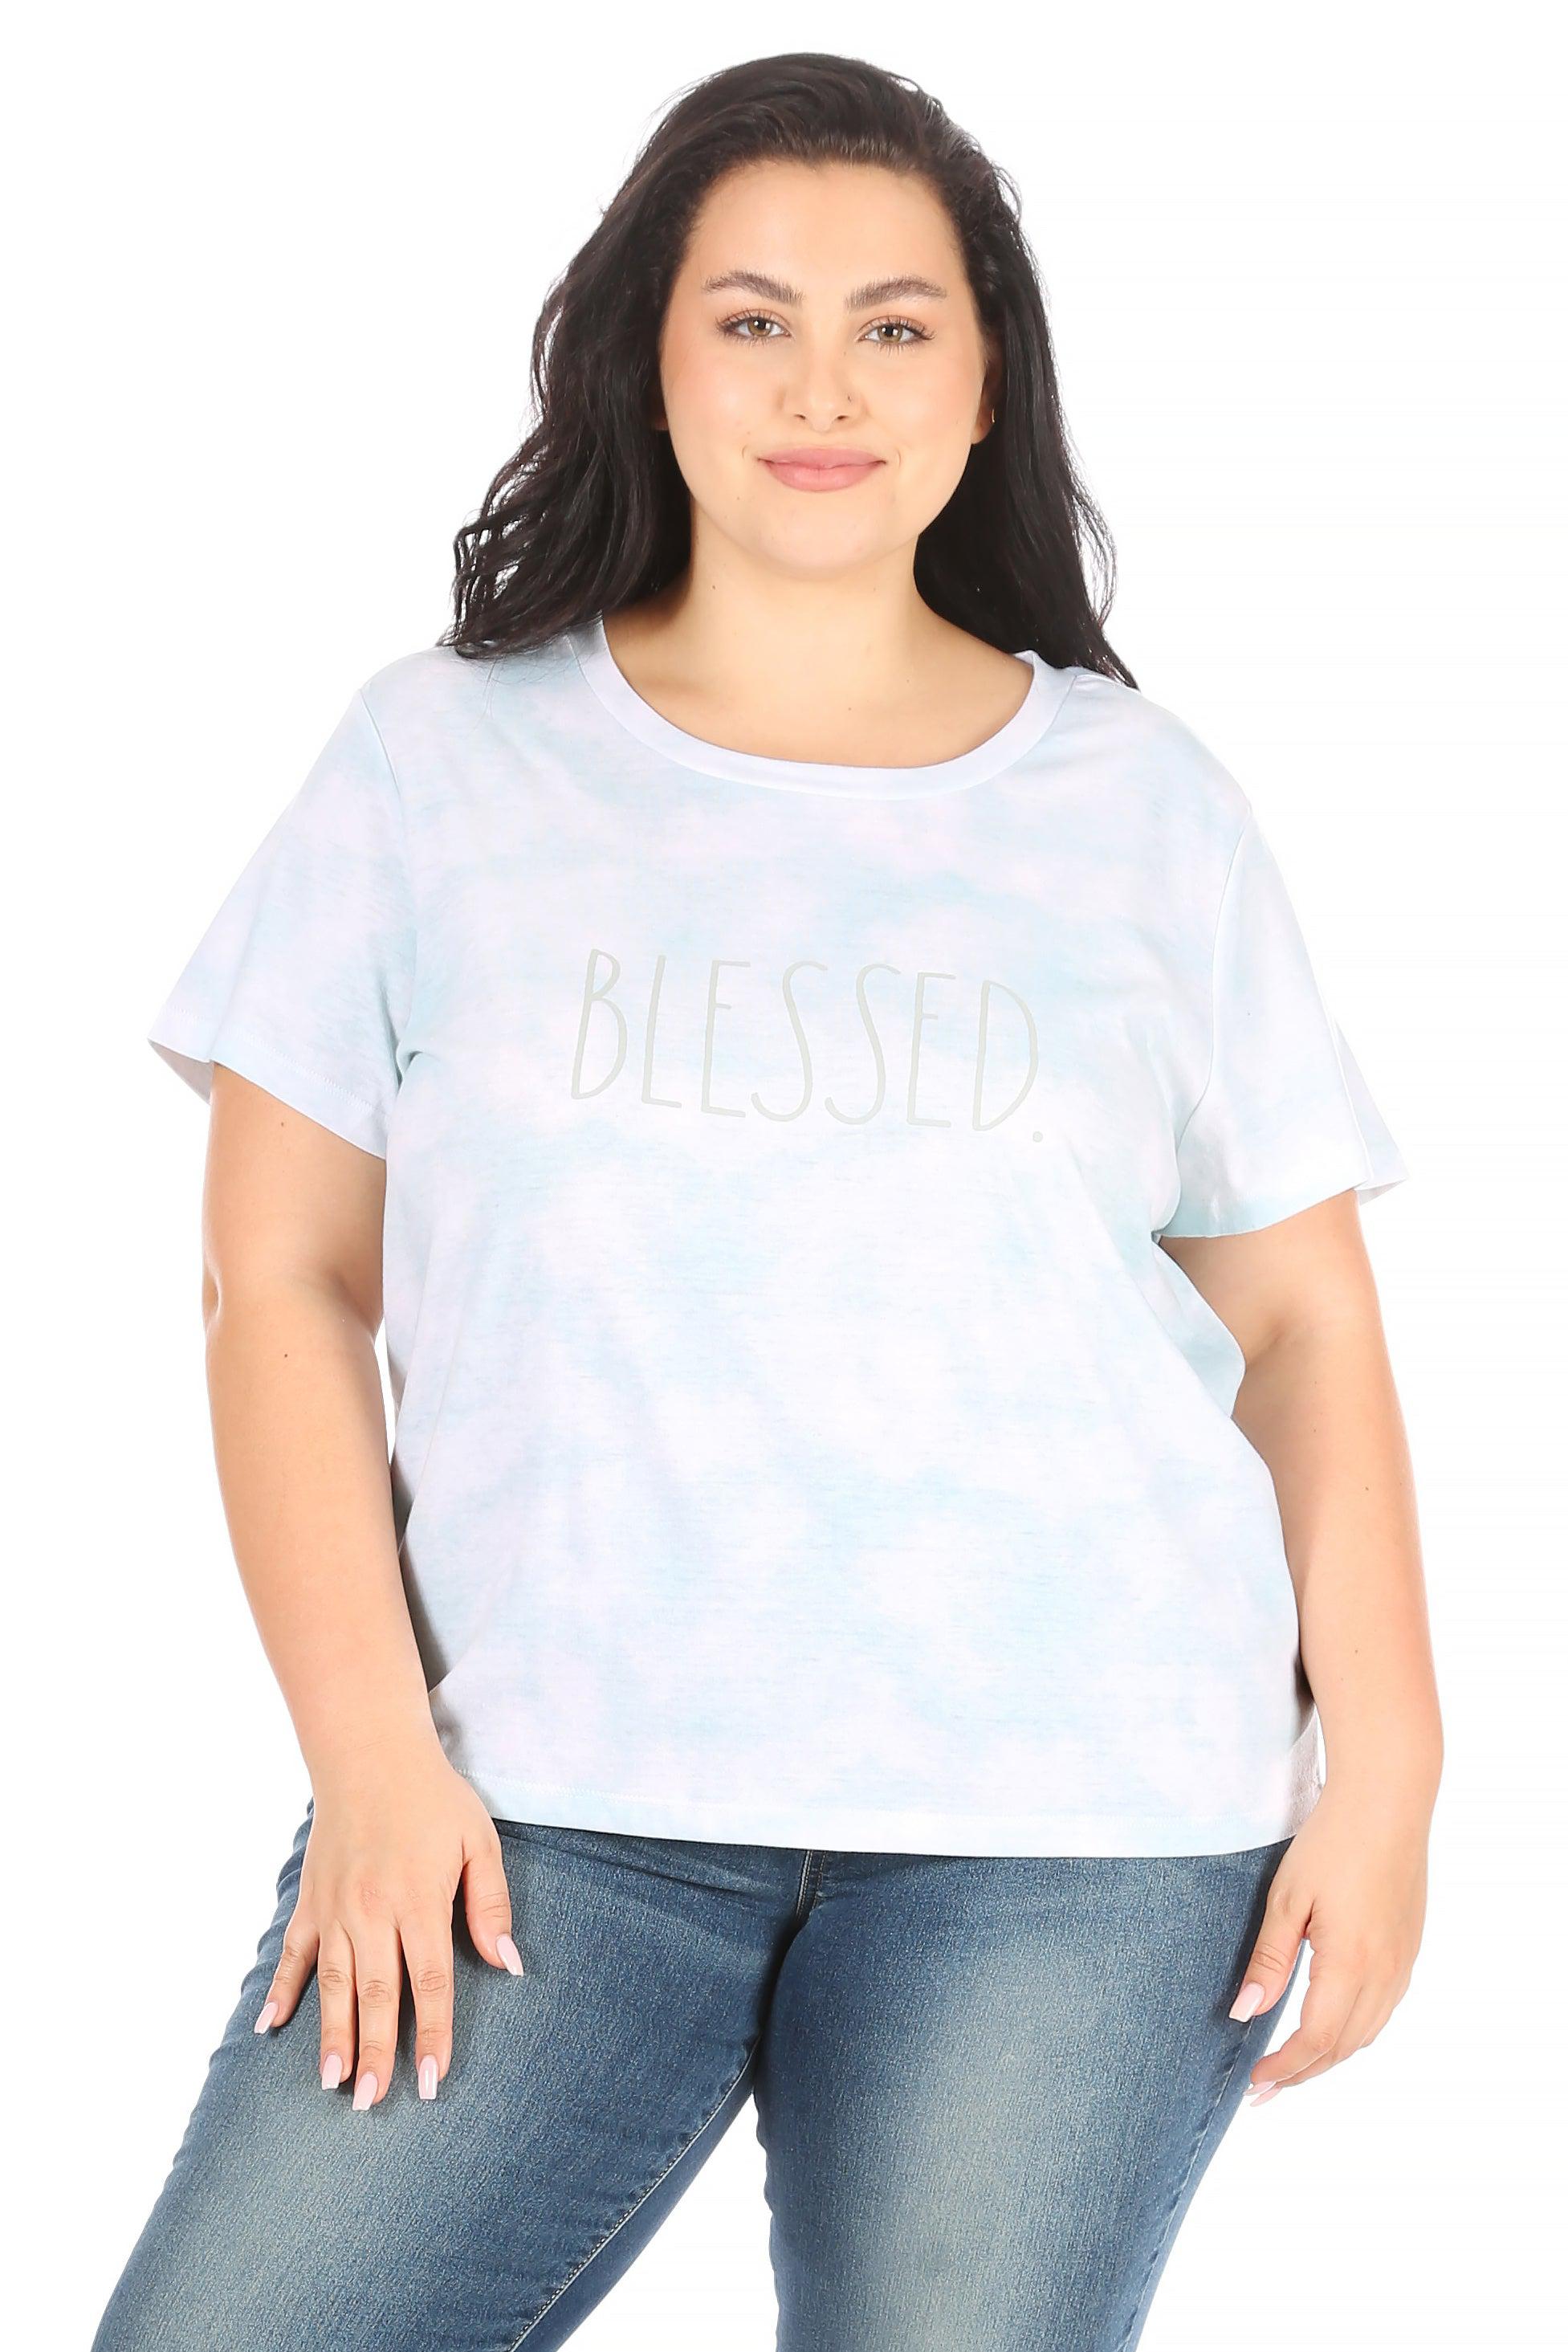 Women's Plus Size "BLESSED" Short Sleeve Icon T-Shirt - Rae Dunn Wear